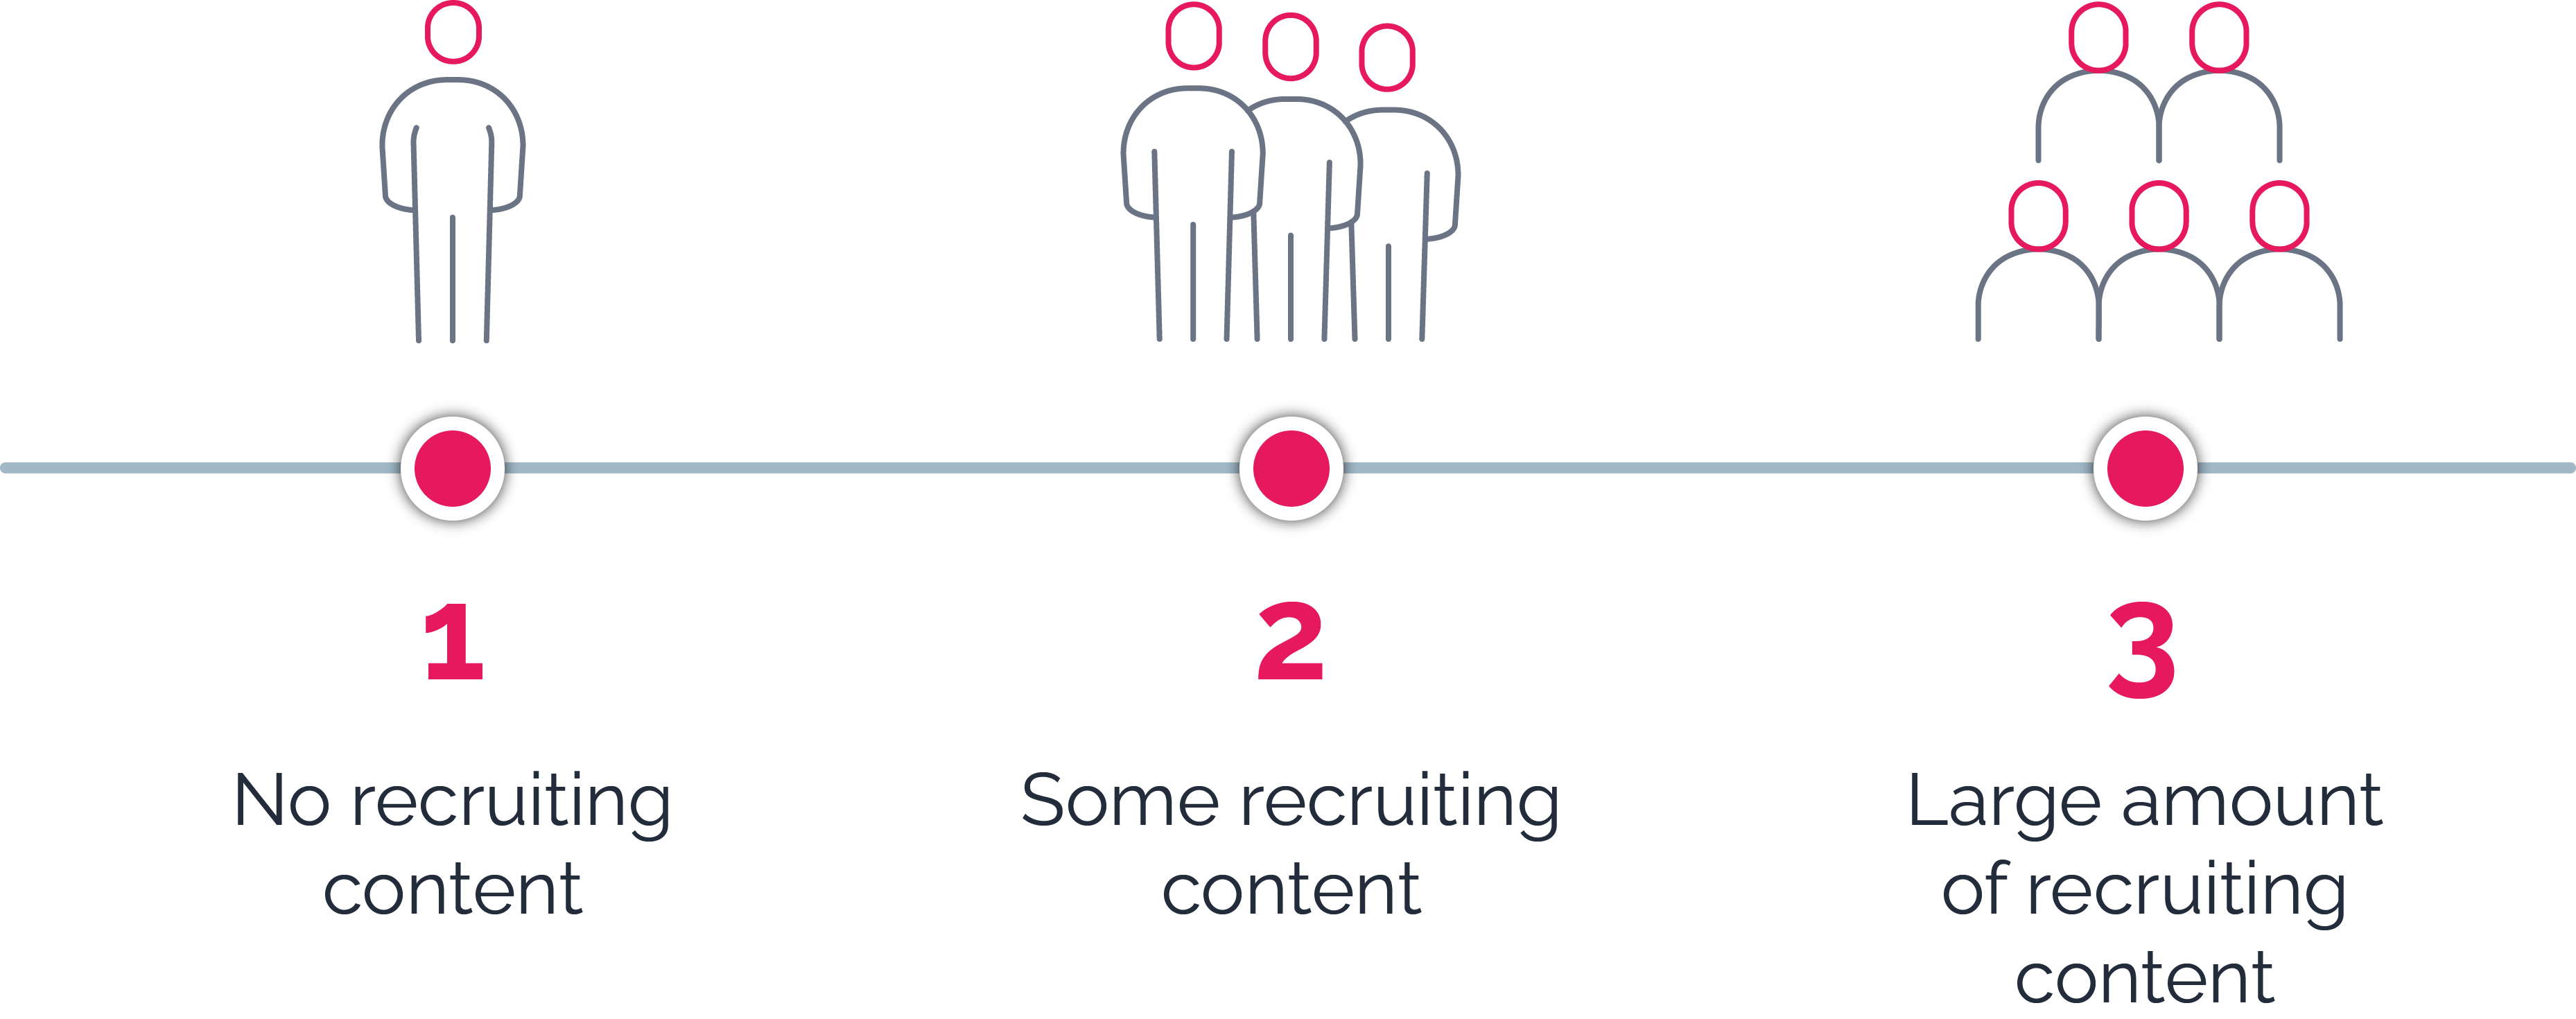 no recruiting content - some recruiting content - large amount of recruiting content